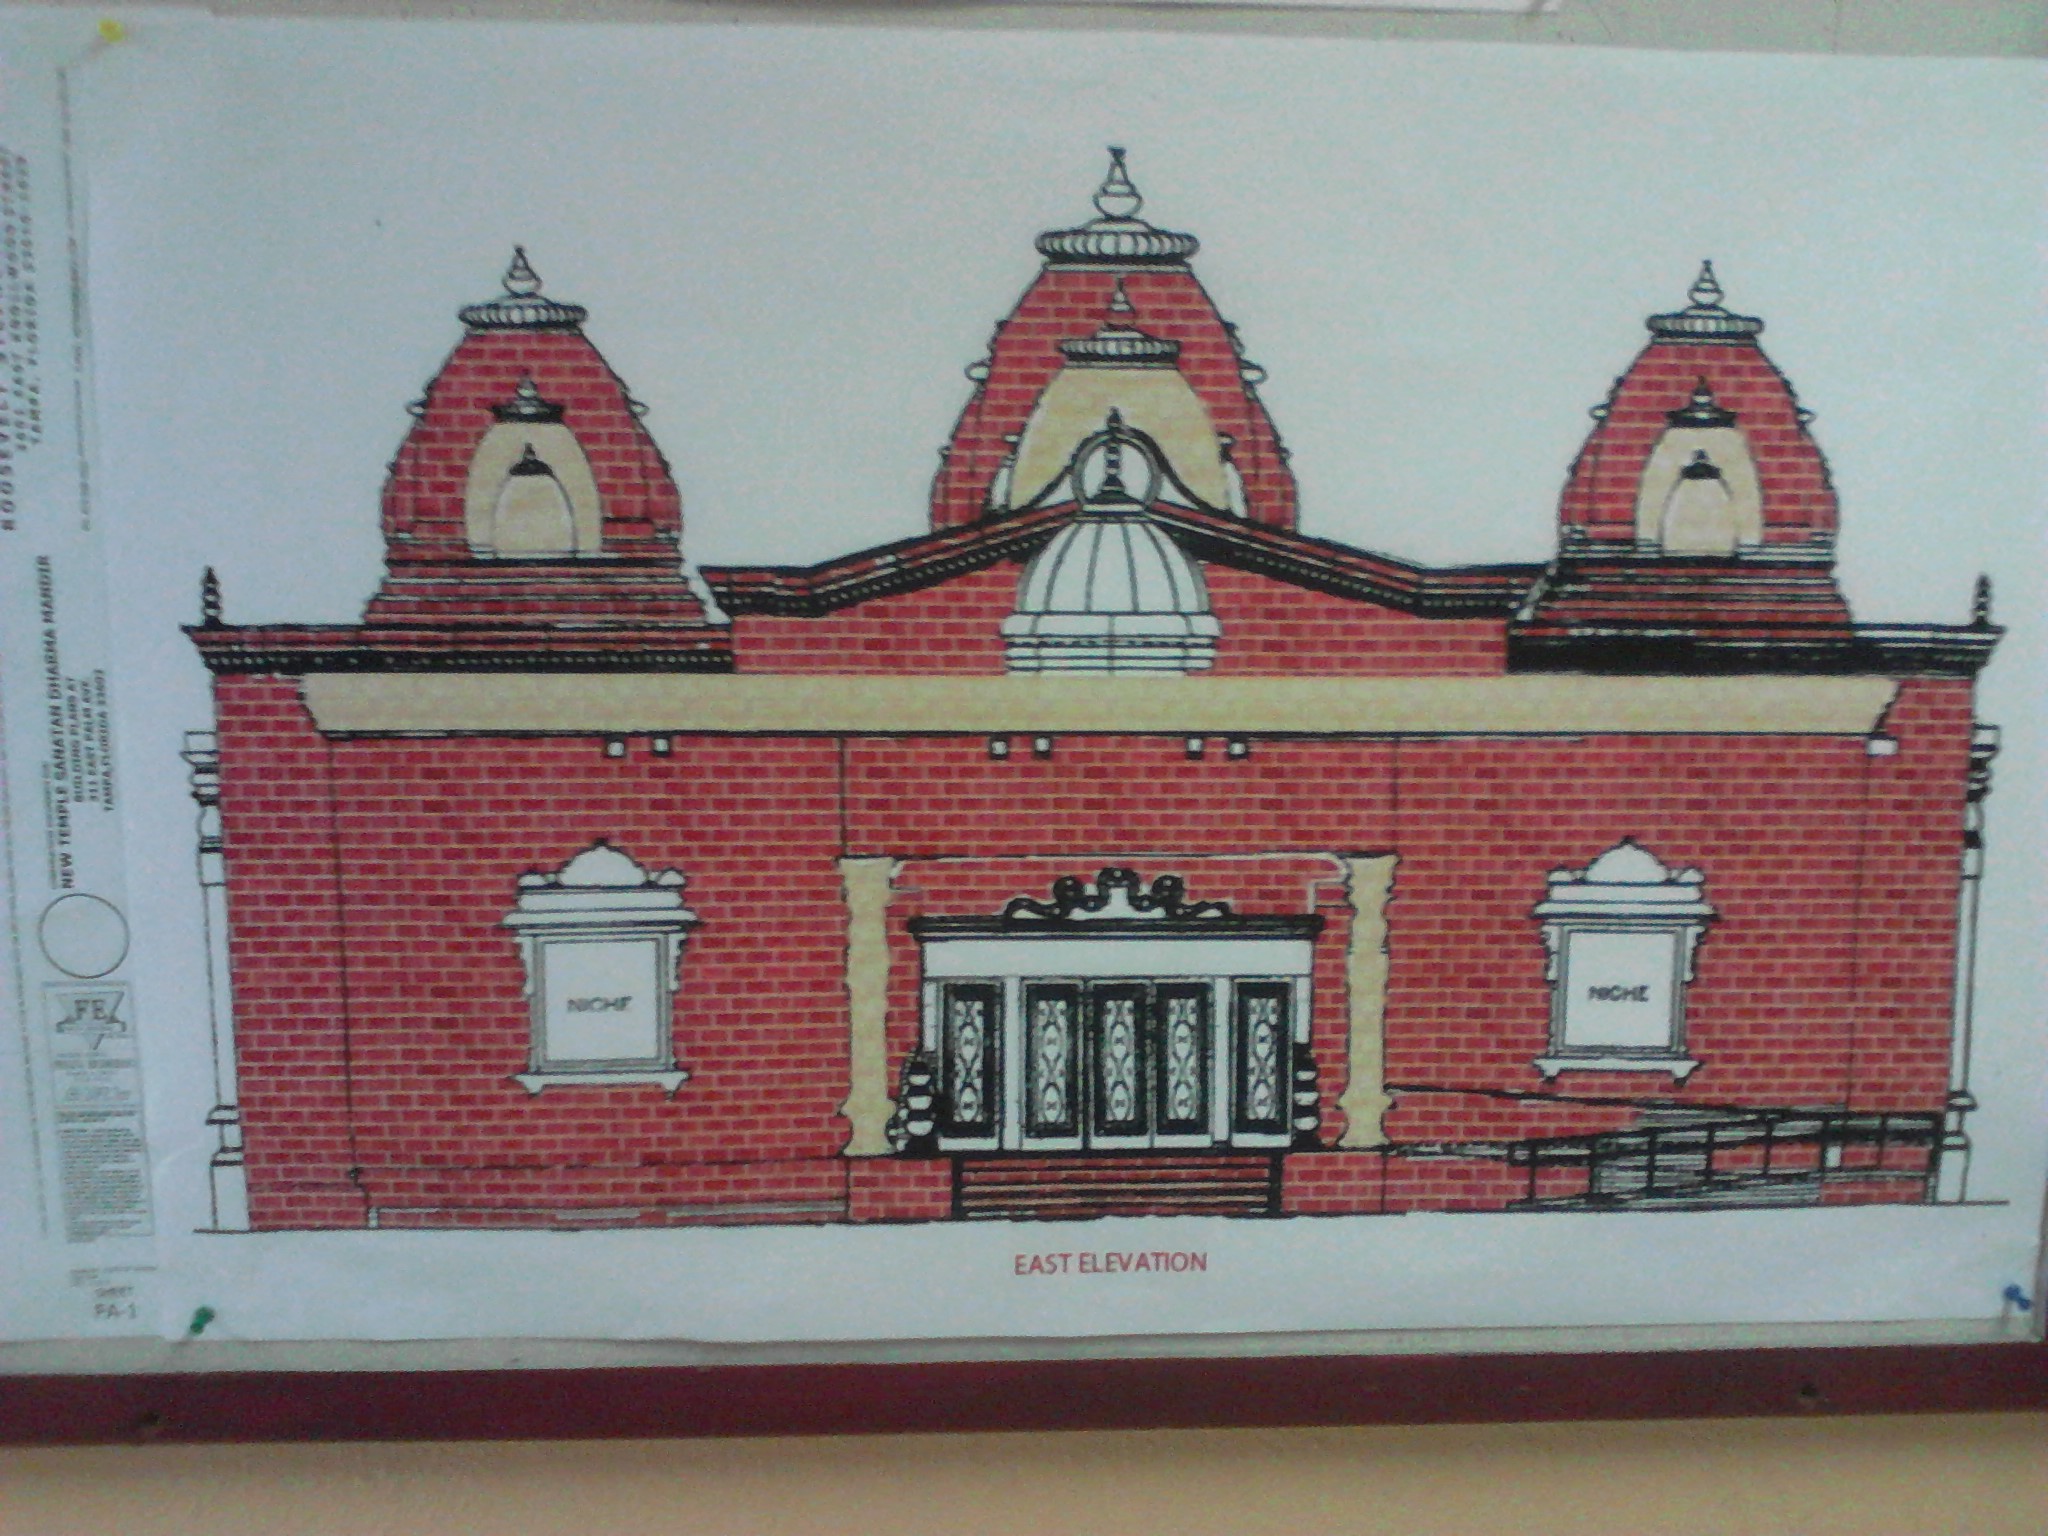 The facade of the new Hindu temple will be red brick and have five rising towers atop the roof.